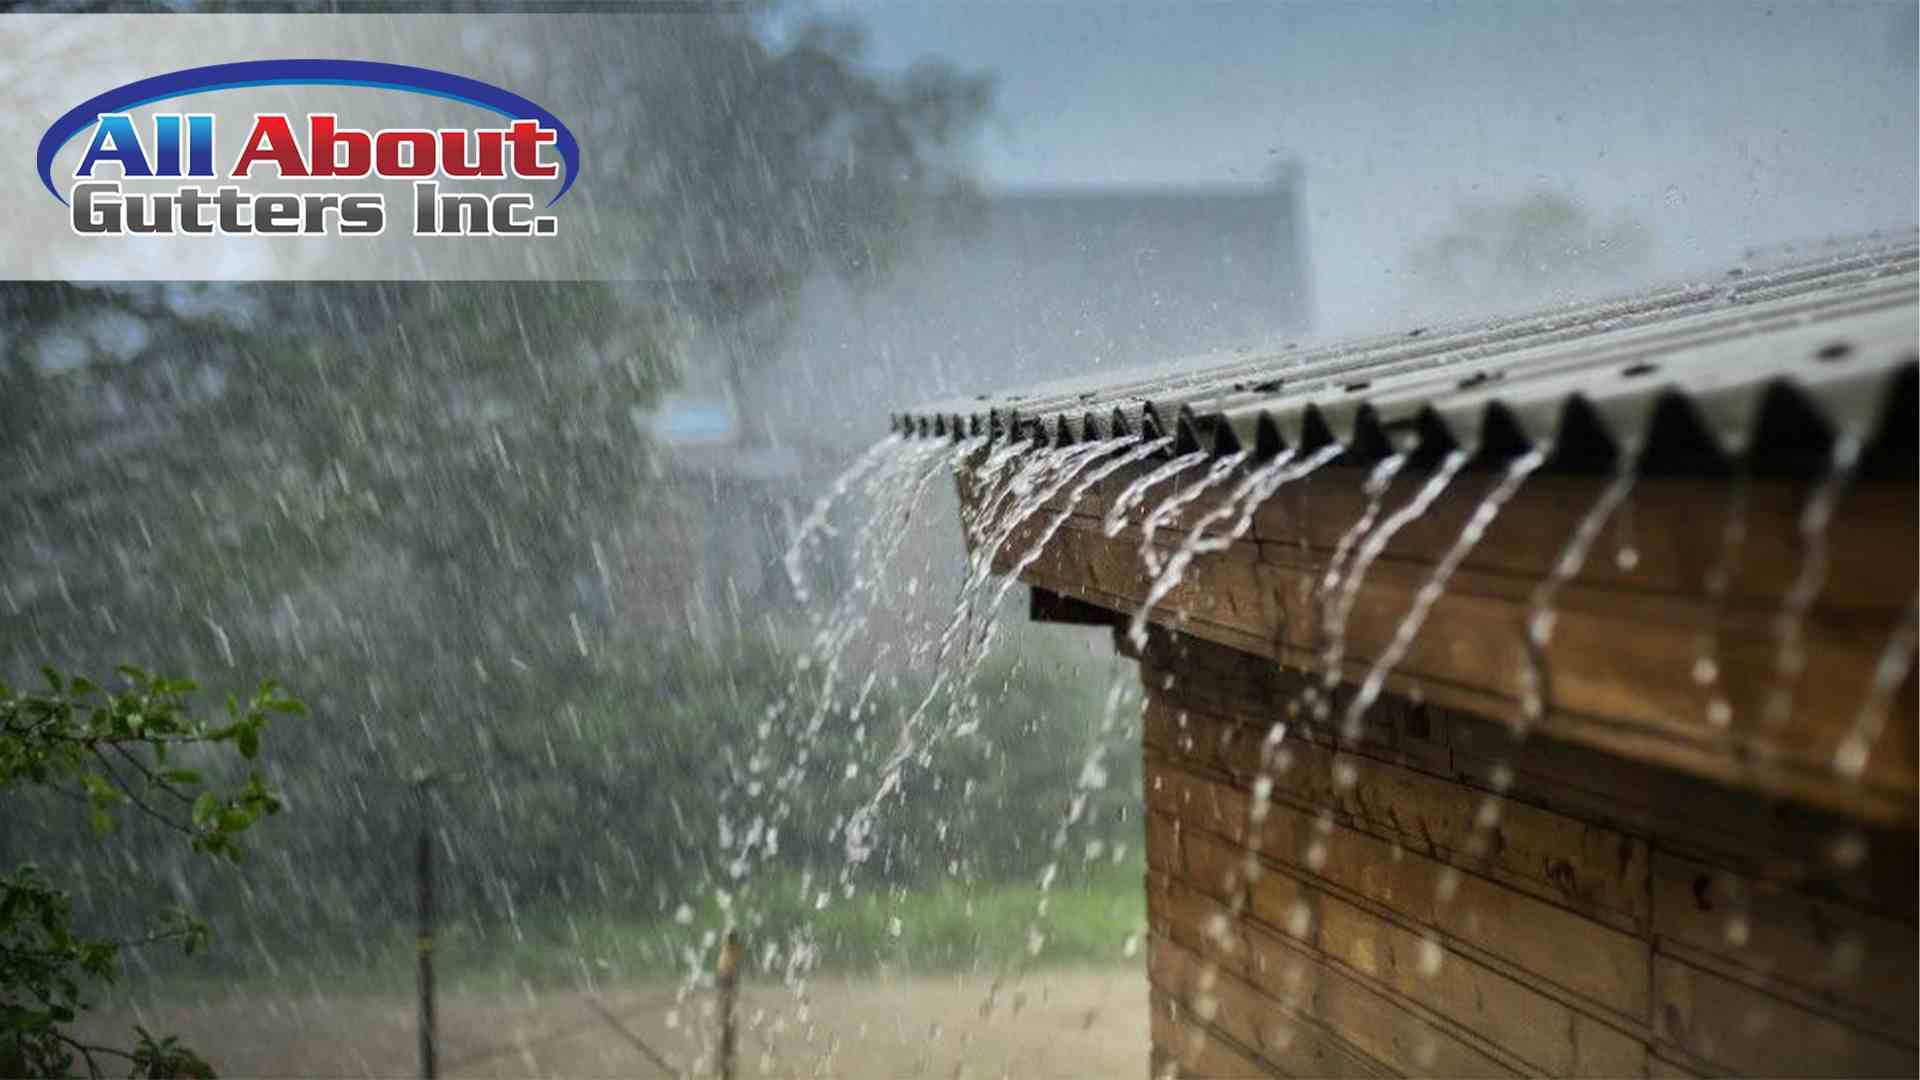 Rain Gutters to Consider